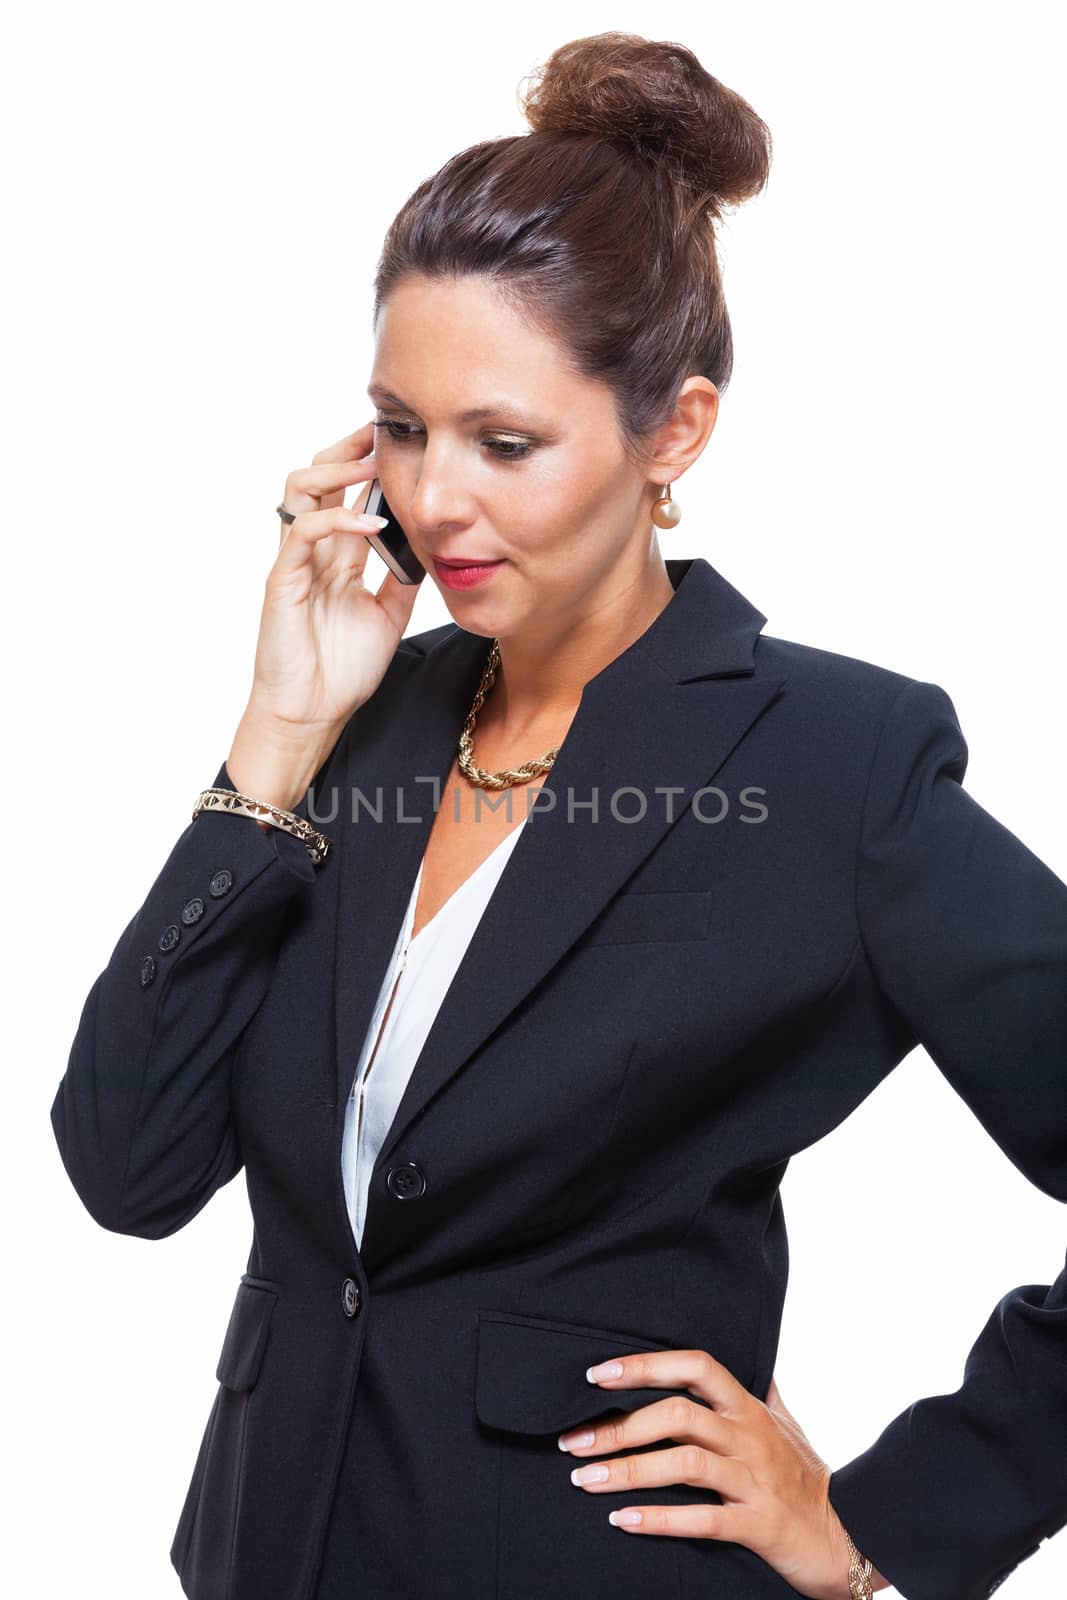 Portrait of a Happy Young Businesswoman Wearing Black Suit, Calling Someone on Mobile Phone. Isolated on White Background.